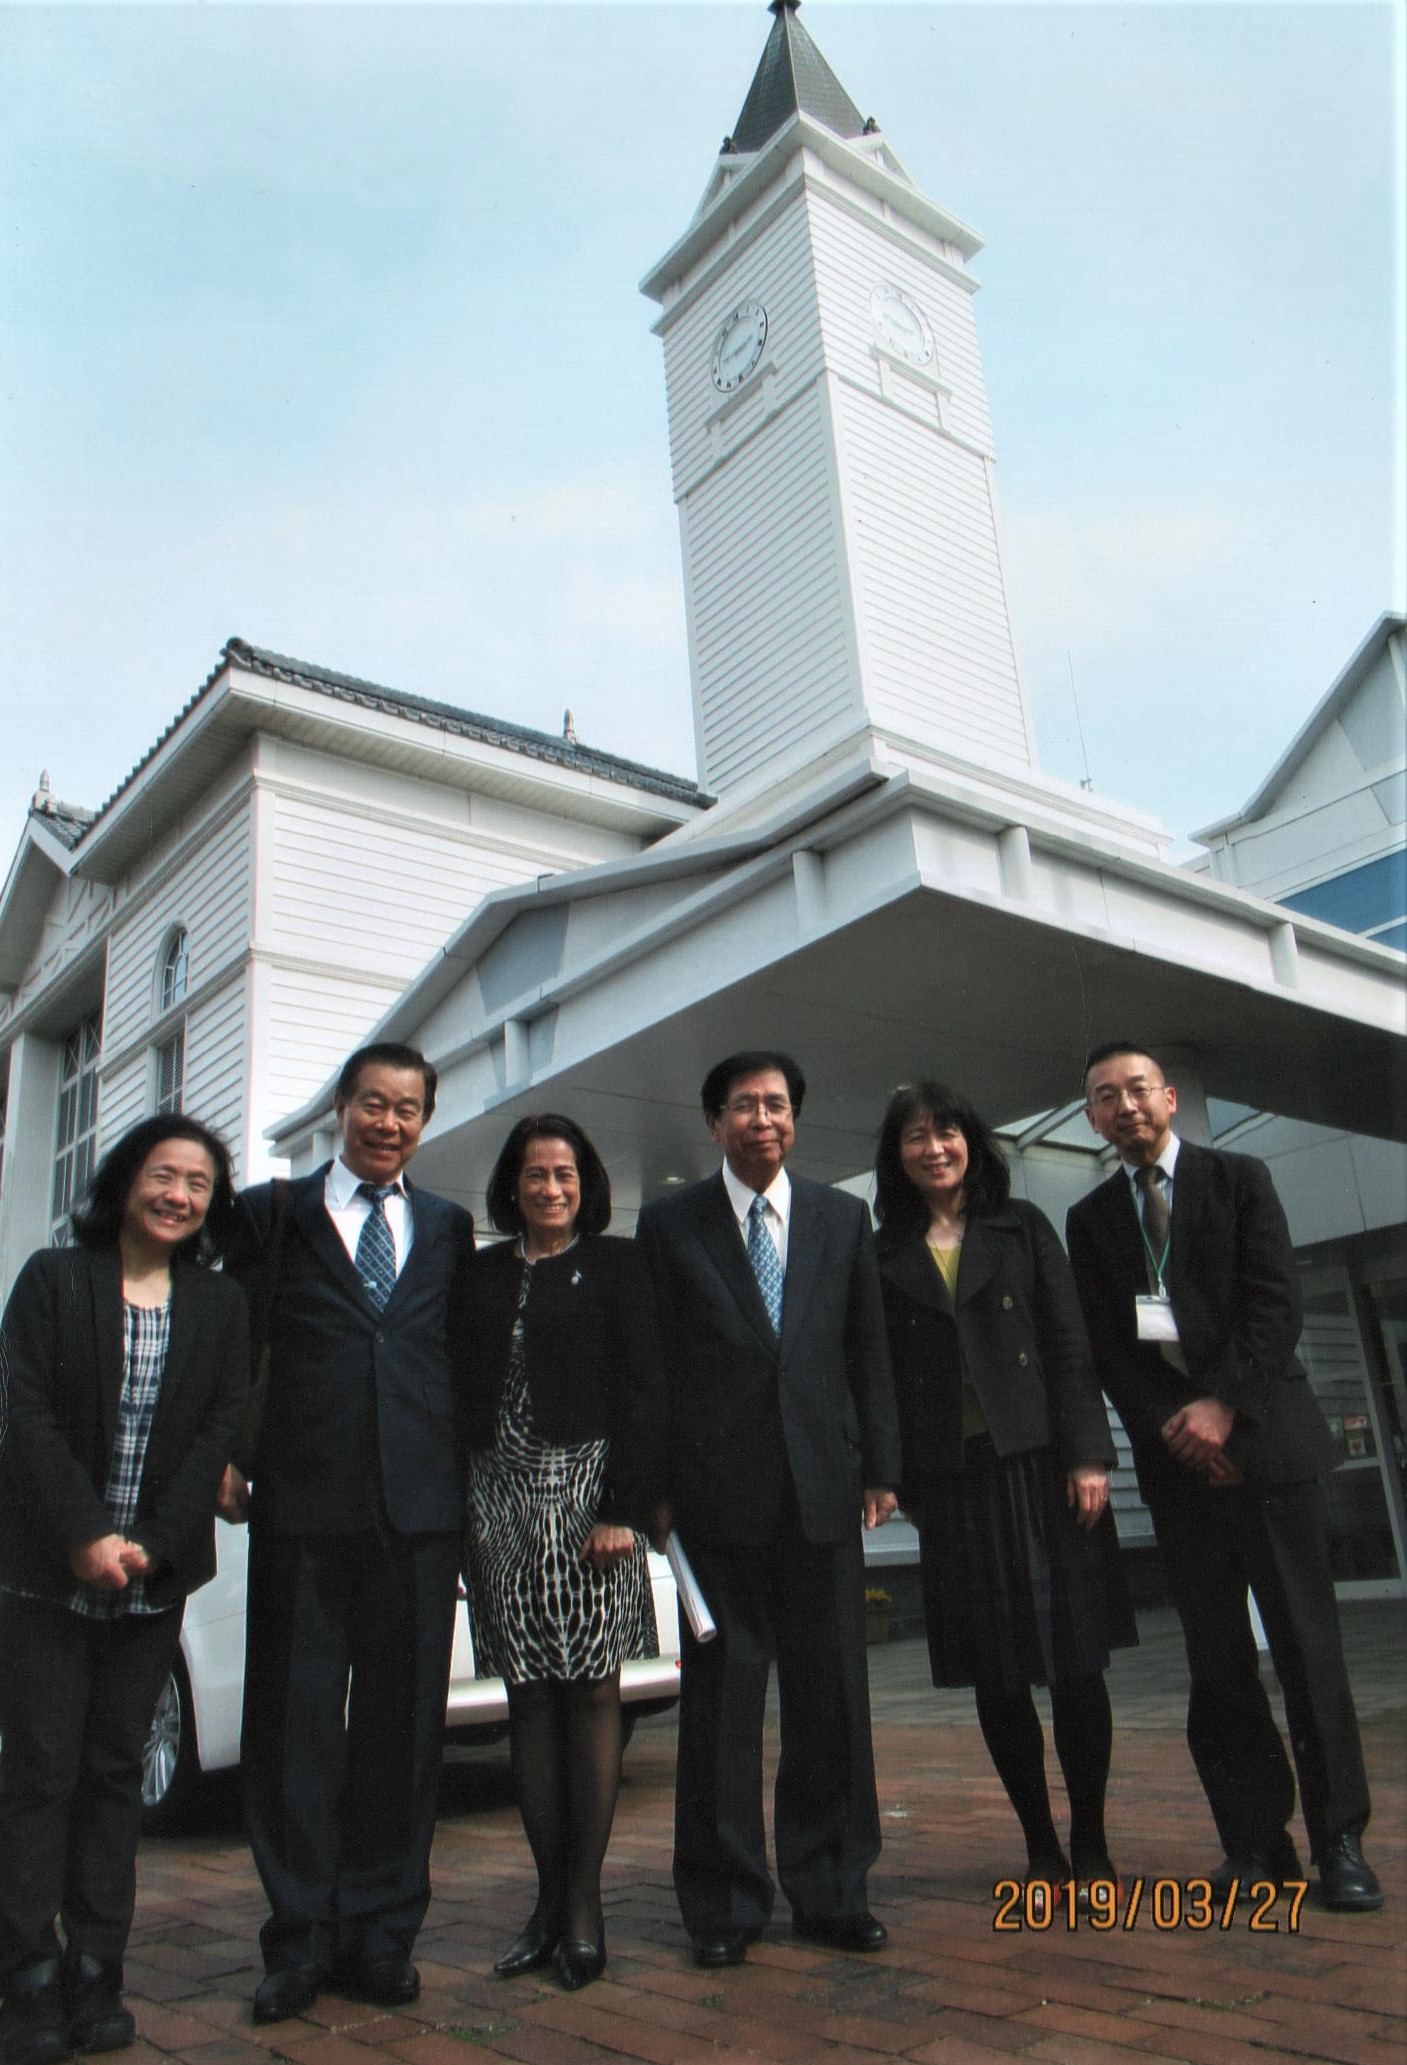 Takahara Caregiver School at Aichiken, Nagoya City (Second third & fourth from the left: Mr. Hideyo Sato, Mrs. Marietta Sato, and Mr. Katsumi Furuta) with the other three delegates.